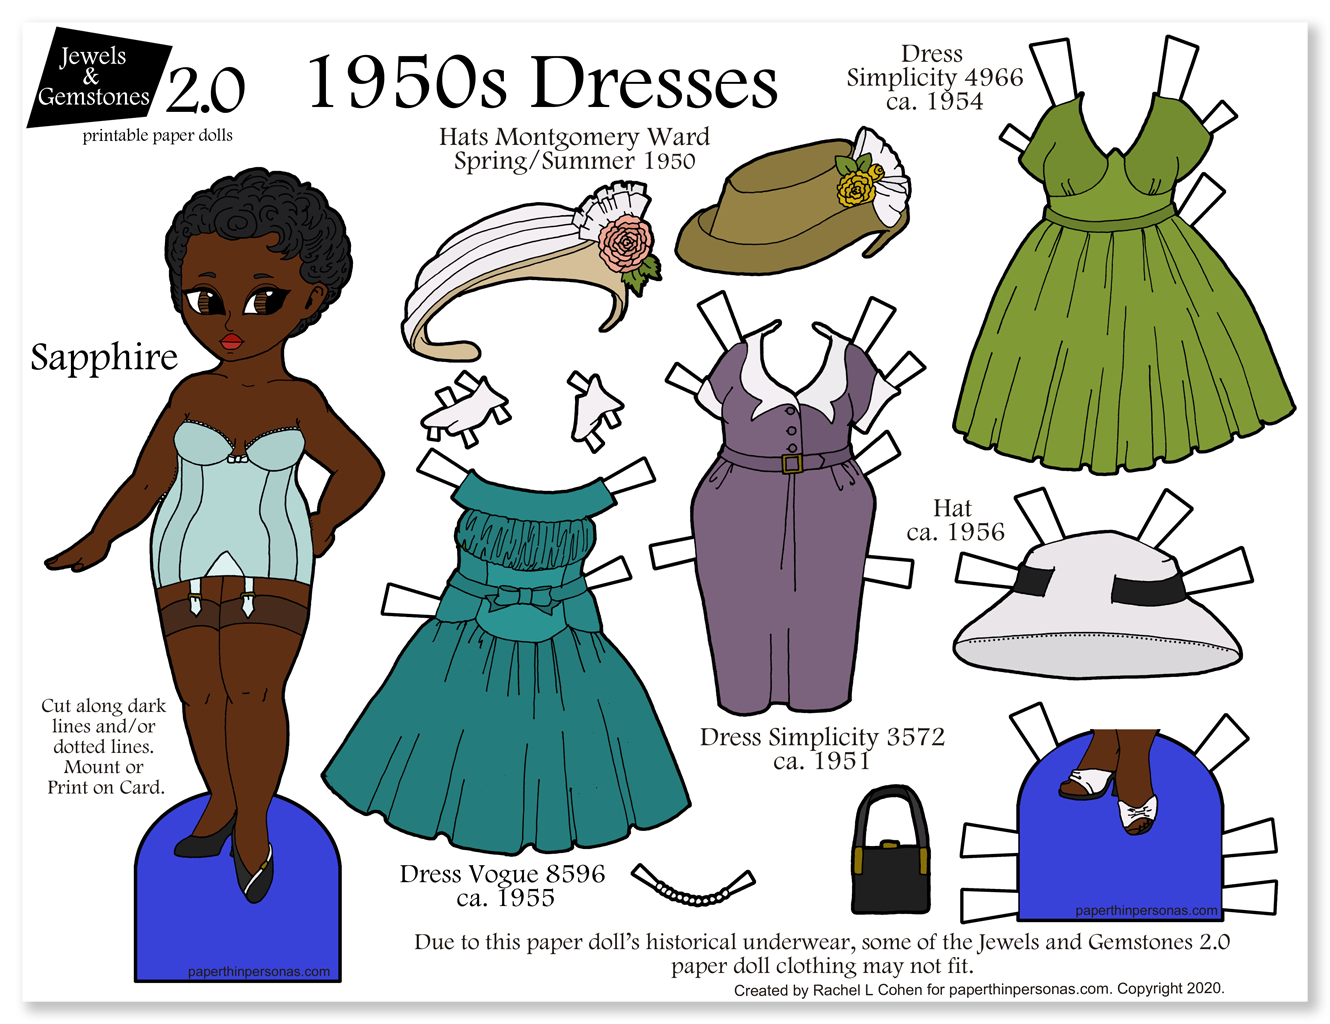 SUBLIME FASHIONS OF THE 1950s Paper Doll Book Gorgeous COUTURE Volume 1